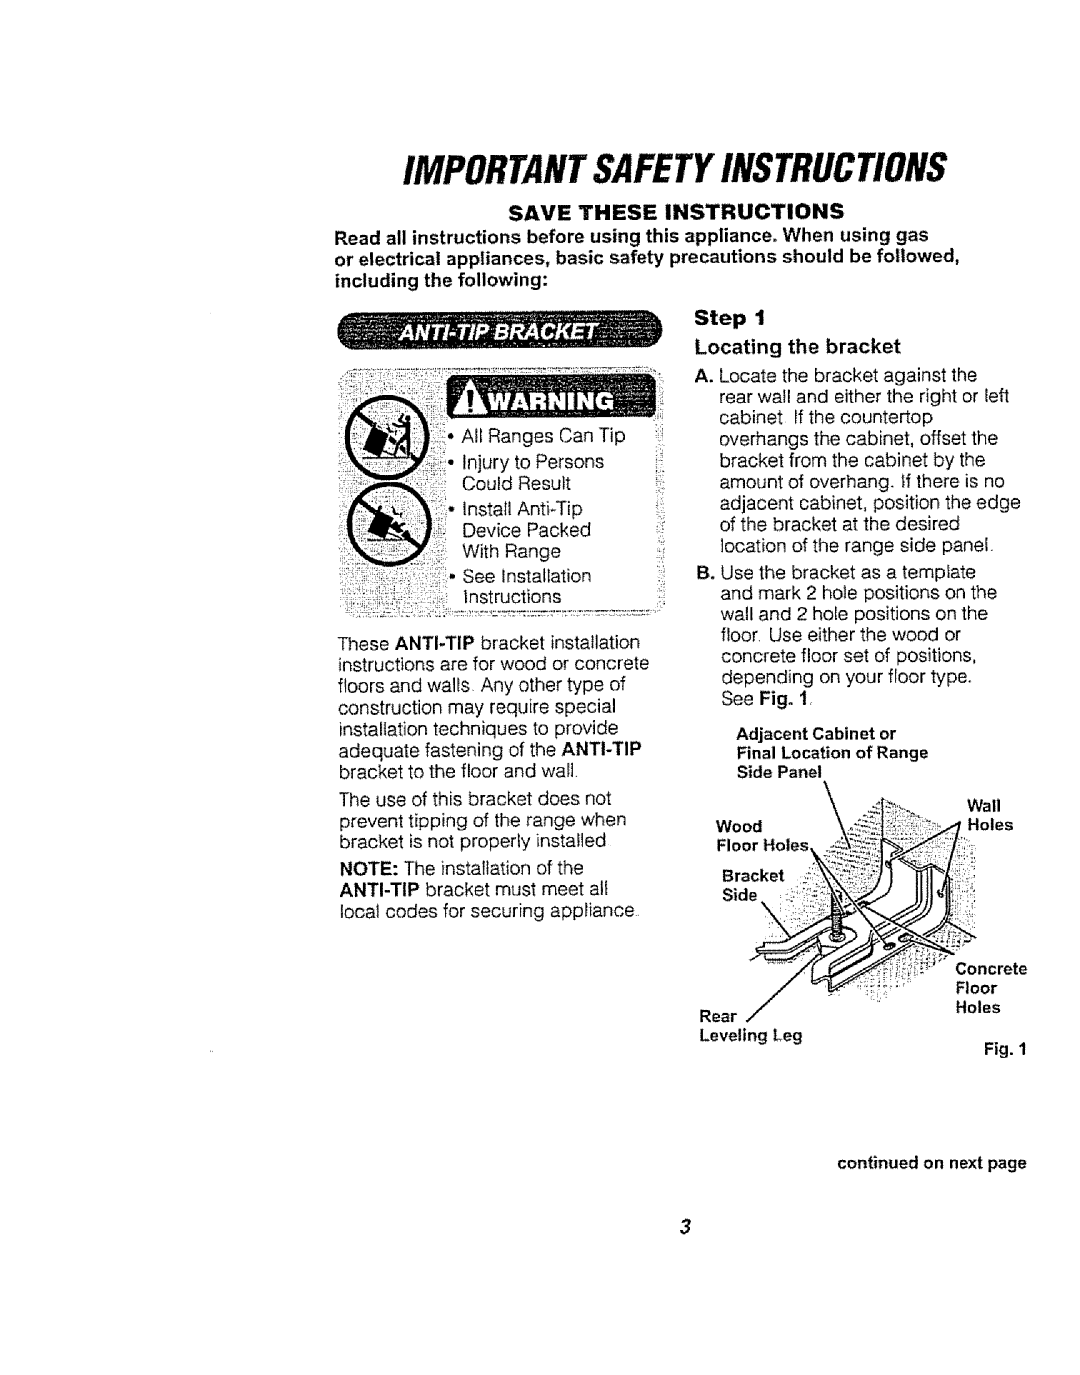 Kenmore 911.94754, 911.94752 Importantsafetyinstructions, Save These Instructions, Step Locating the bracket, Rear, Holes 